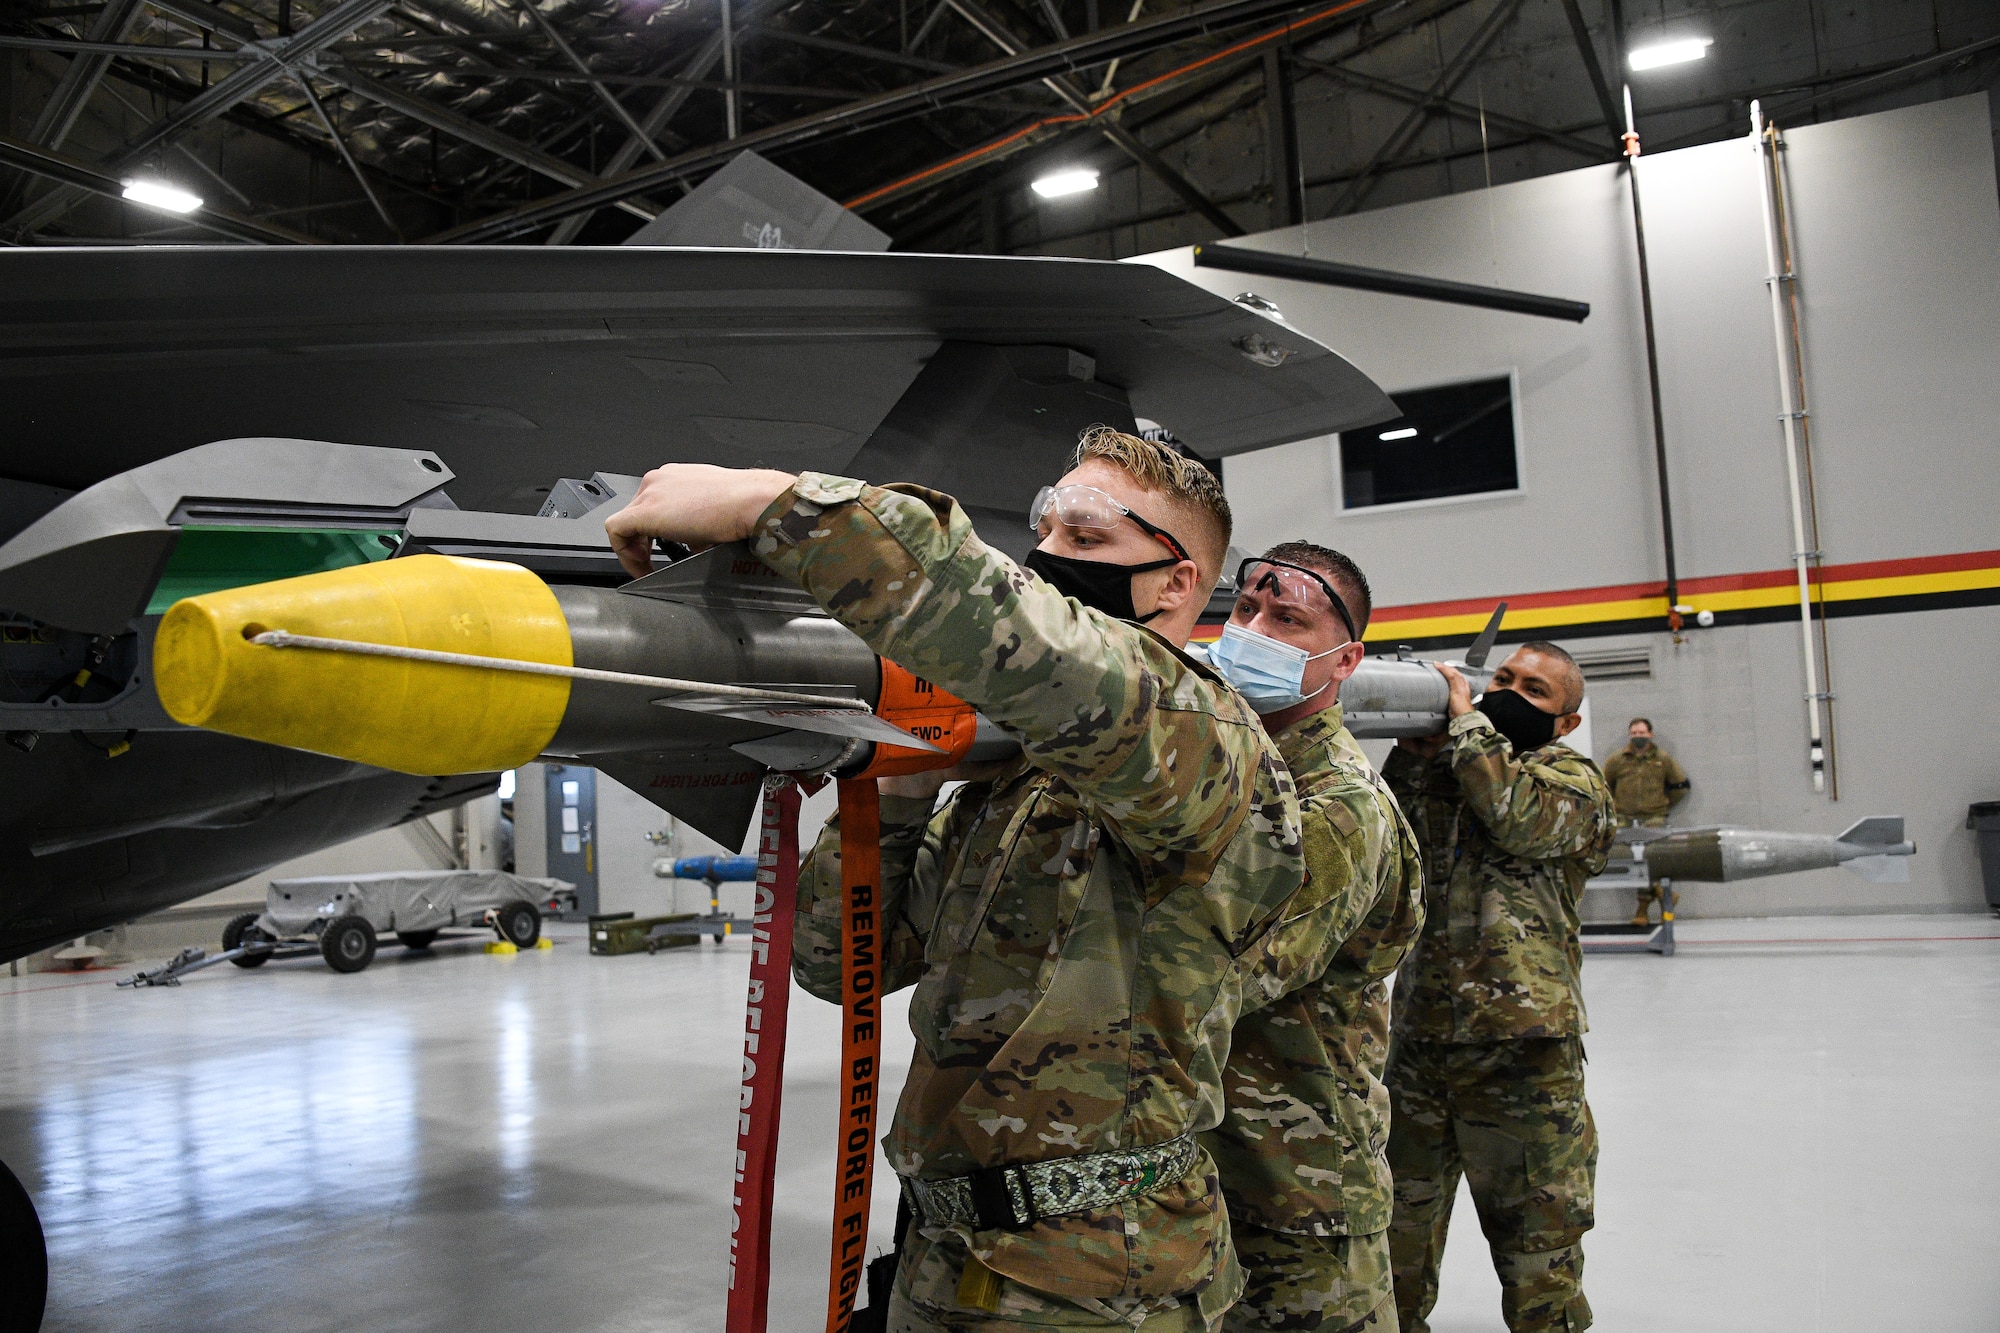 Air Force Reserve maintainers from the 466th Aircraft Maintenance Unit participate in an annual F-35 weapons load competition